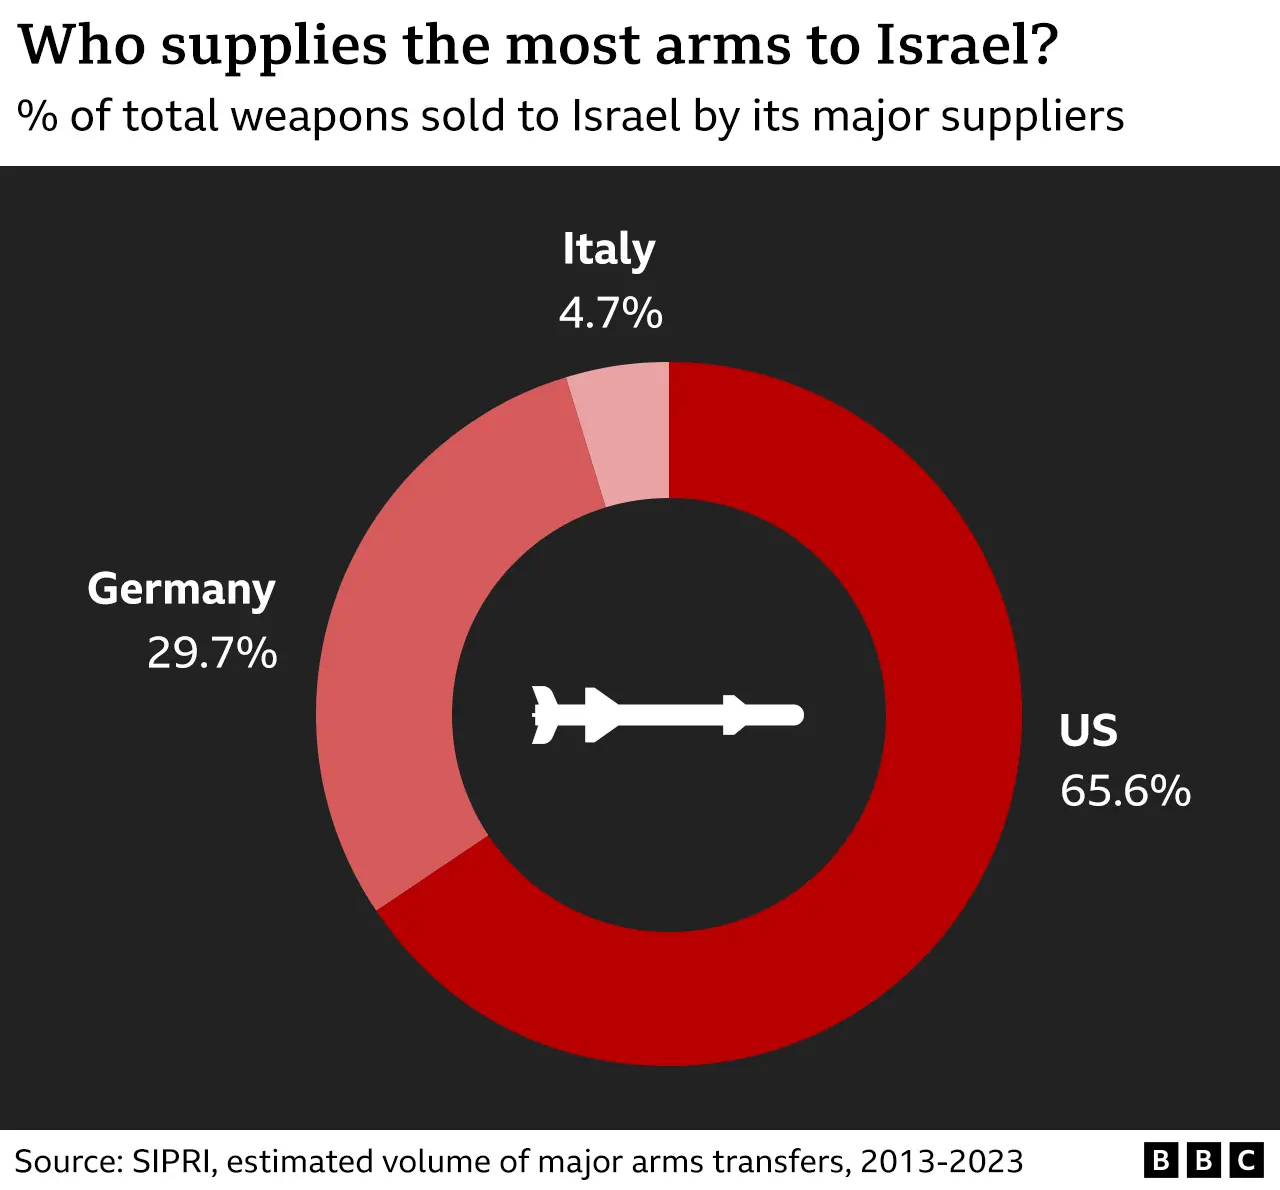 A BBC pie chart showing which nations supply the most arms to Israel. The US is shown as supplying 65.6%, Germany as supplying 29.7% and Italy as supplying 4.7%